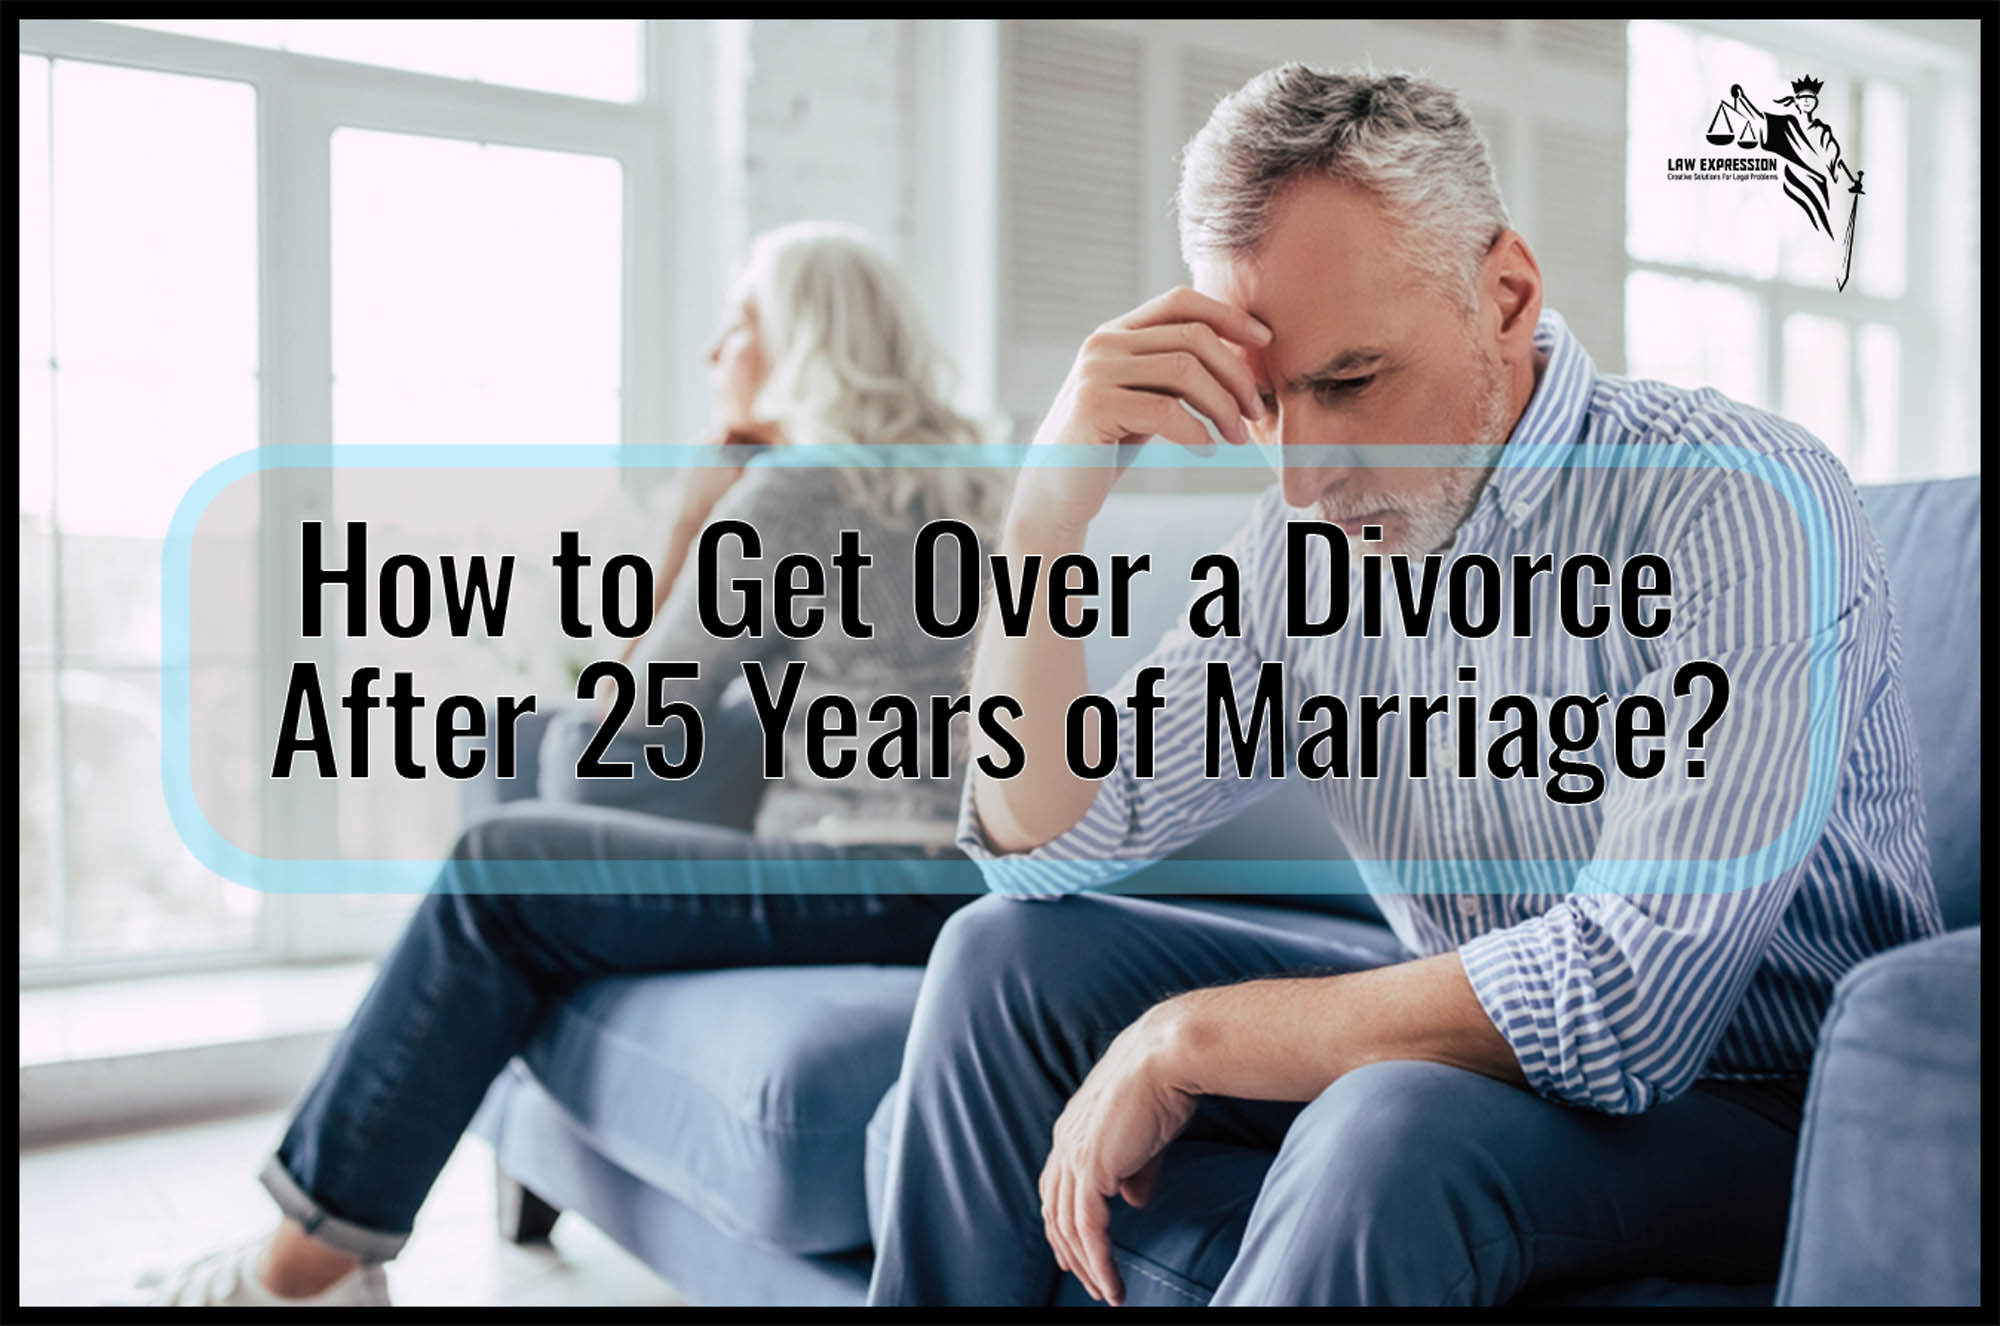 How to Get Over a Divorce After 25 Years of Marriage?